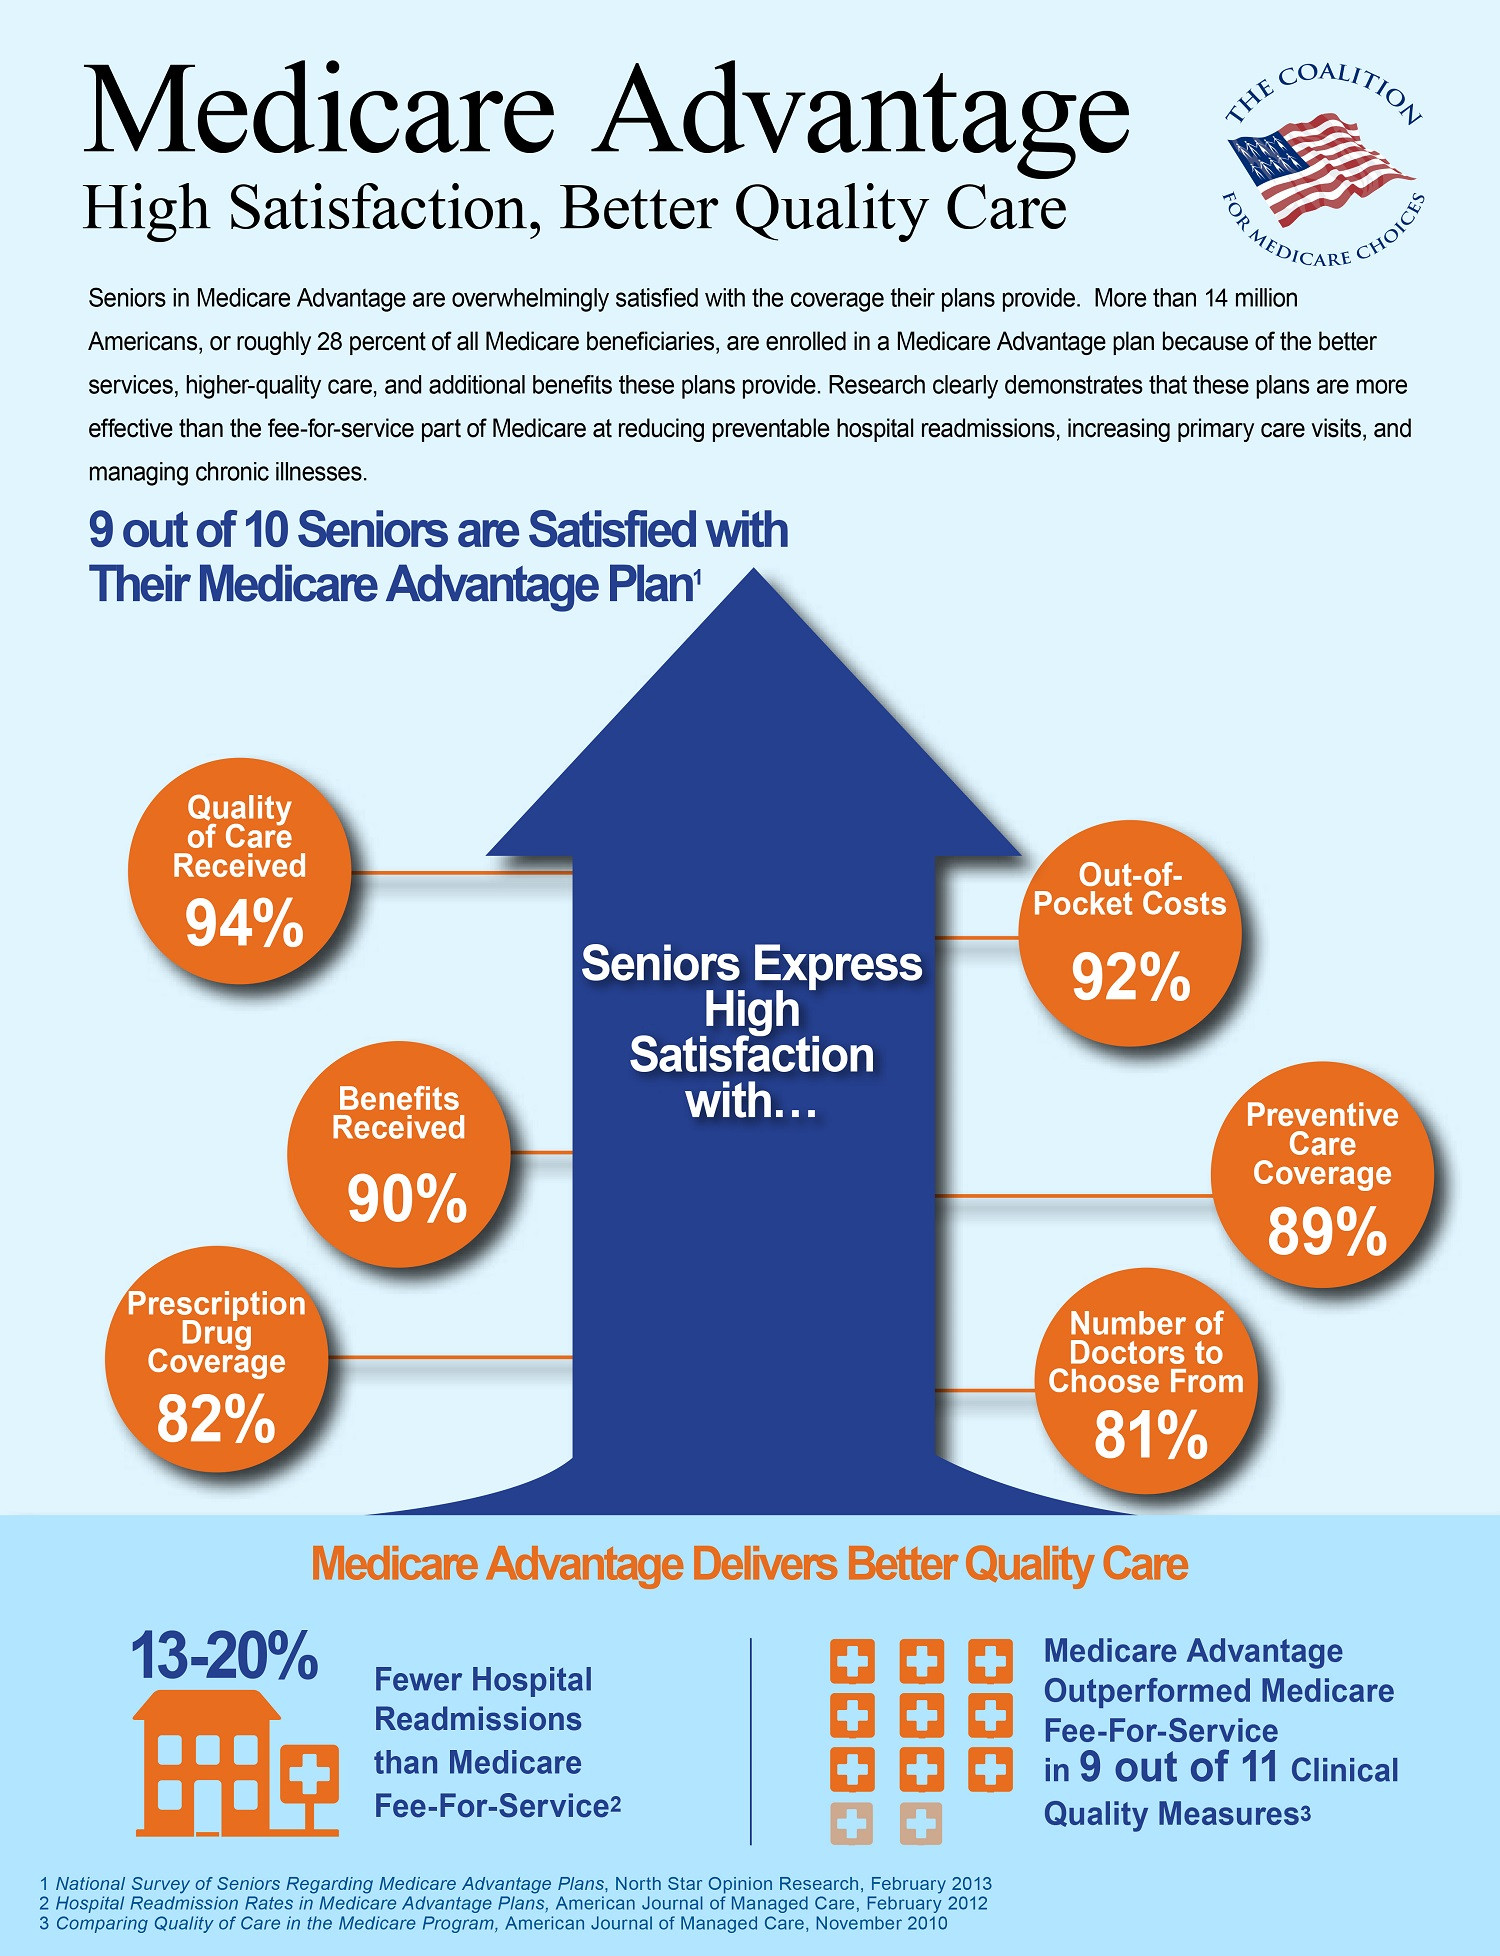 Medicare Advantage: High Satisfaction, Better Quality Care